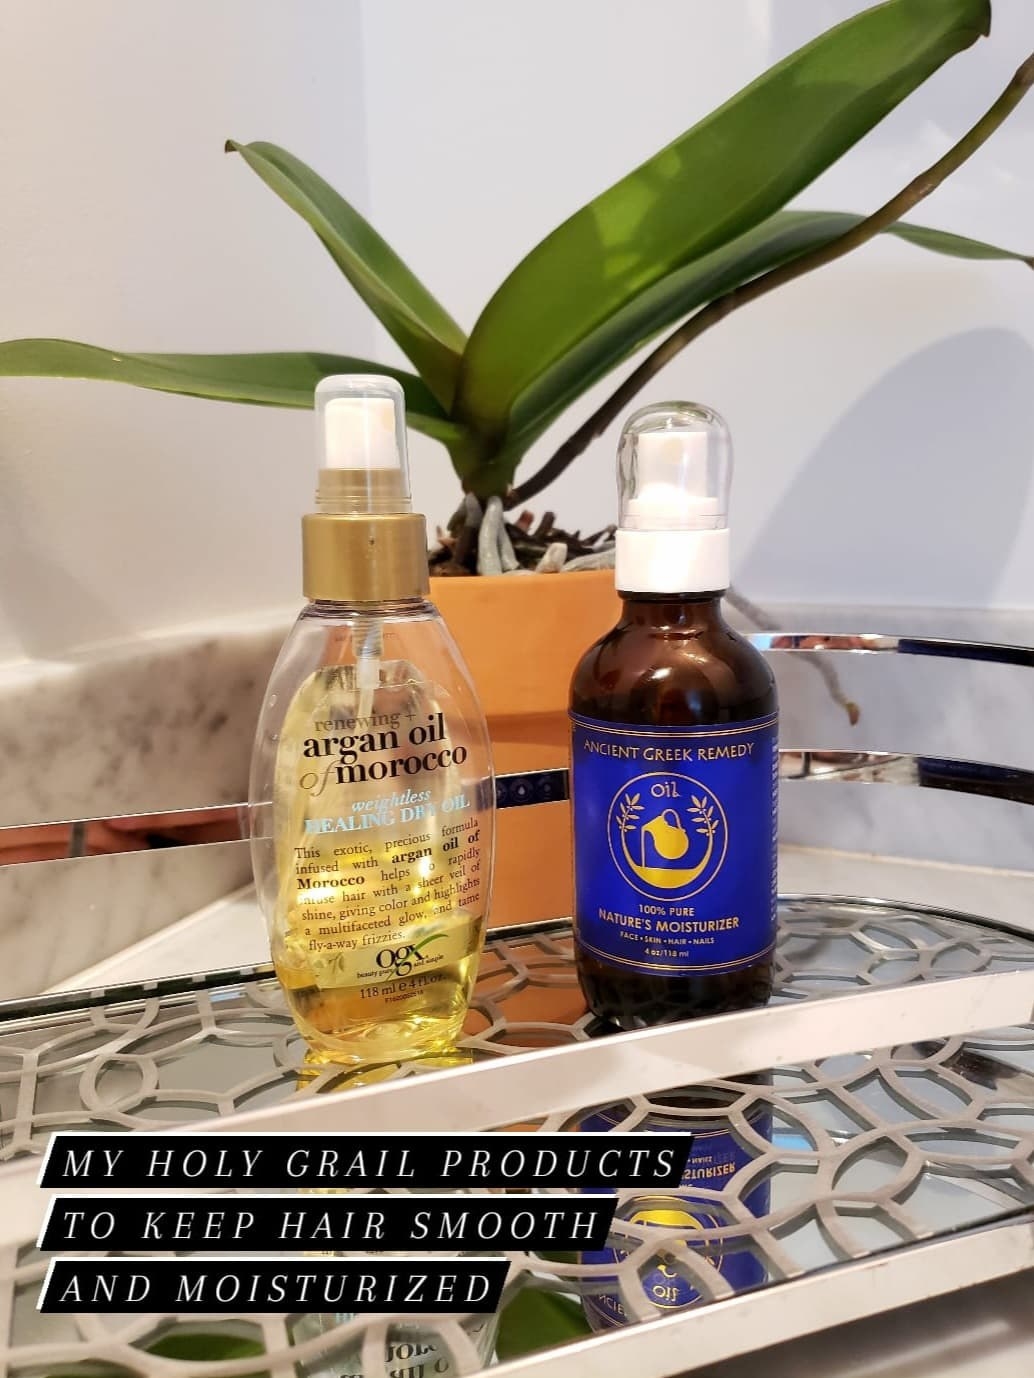 OGX Argan Oil of Morocco and Ancient Greek Remedy Oil sprays with the caption, &quot;My holy grail products to keep hair smooth and moisturized&quot;